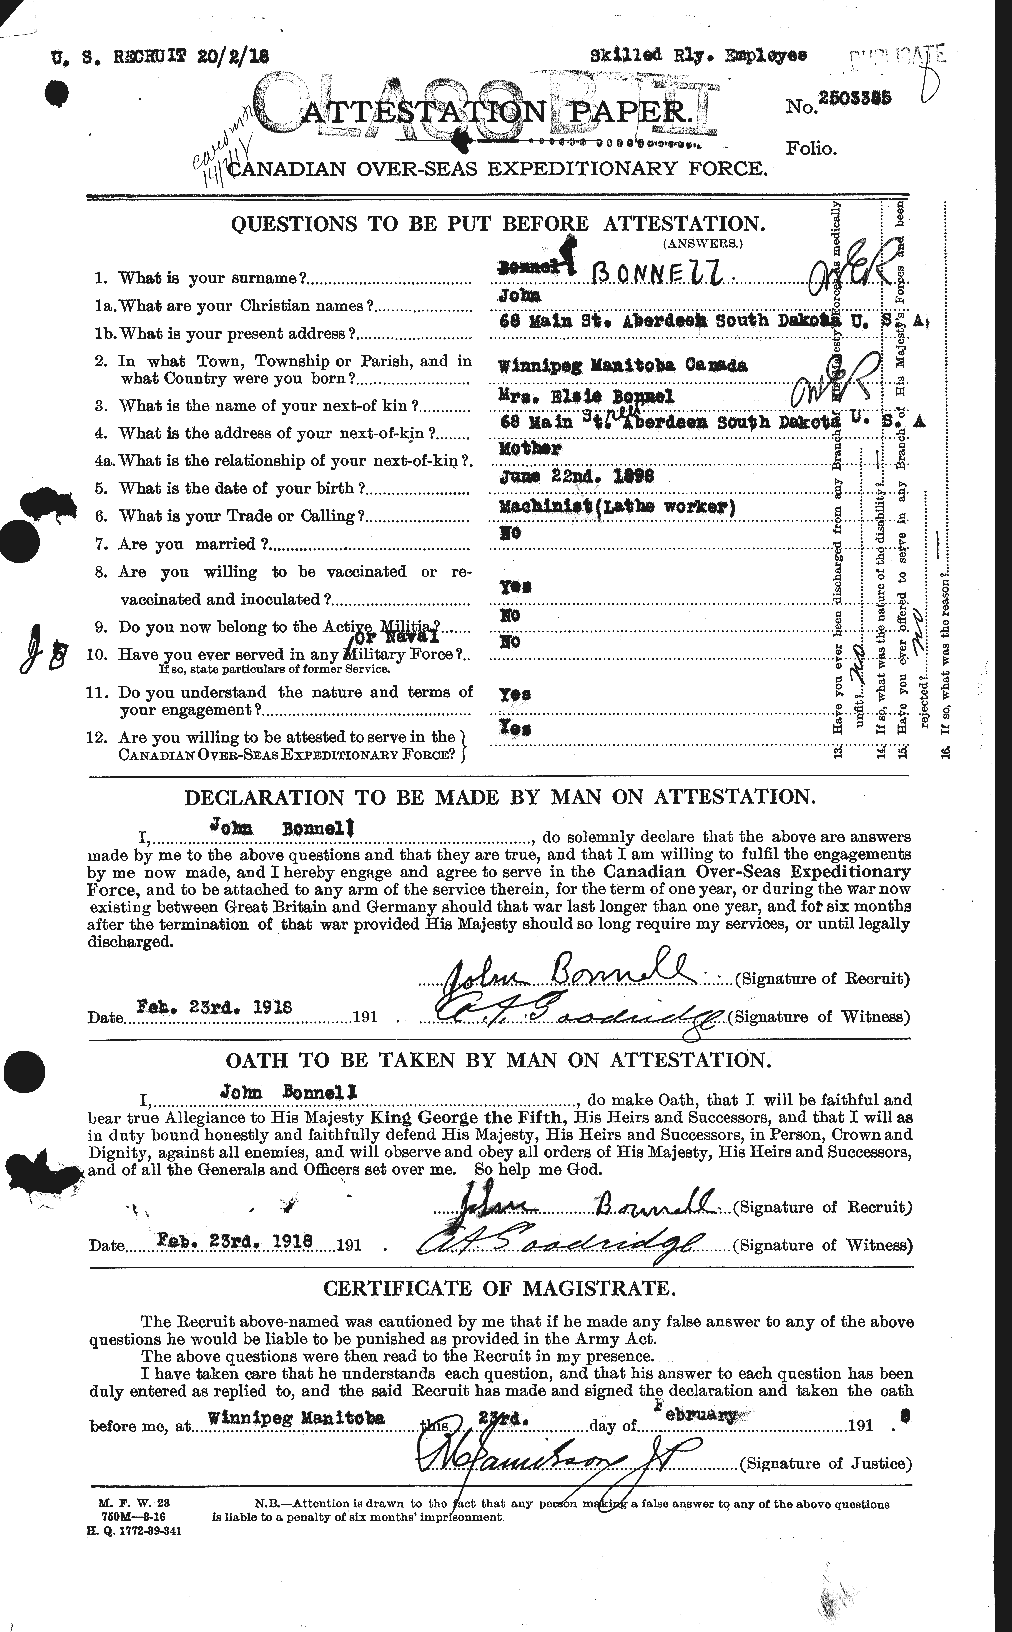 Personnel Records of the First World War - CEF 250745a